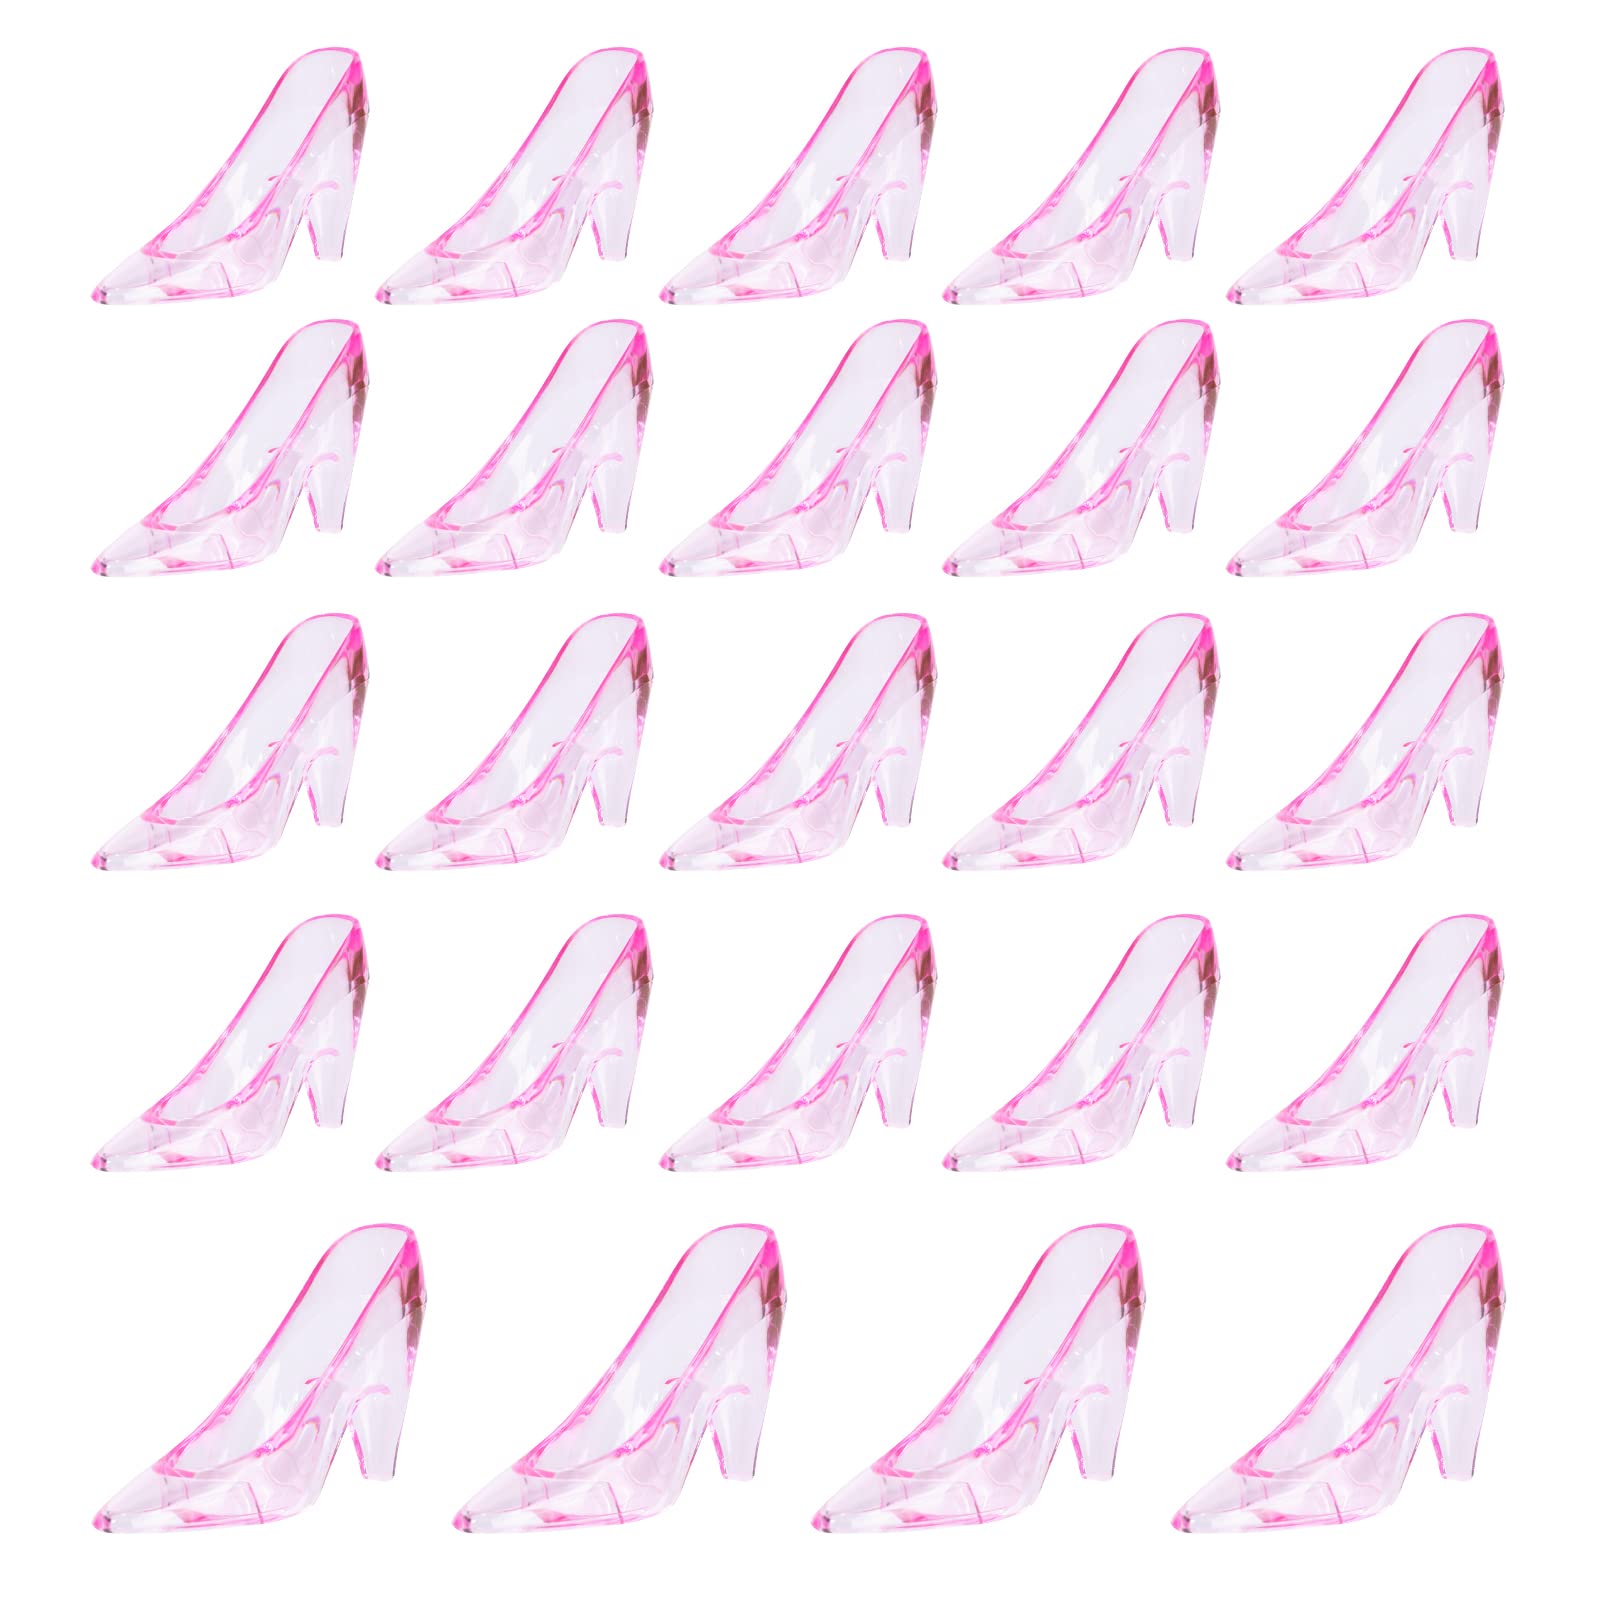 ZYFLSQ 24 Pieces Mini Plastic Cinderella Slippers High Heels Princess Shoes for Weddings and Birthday Party Gift Decoration